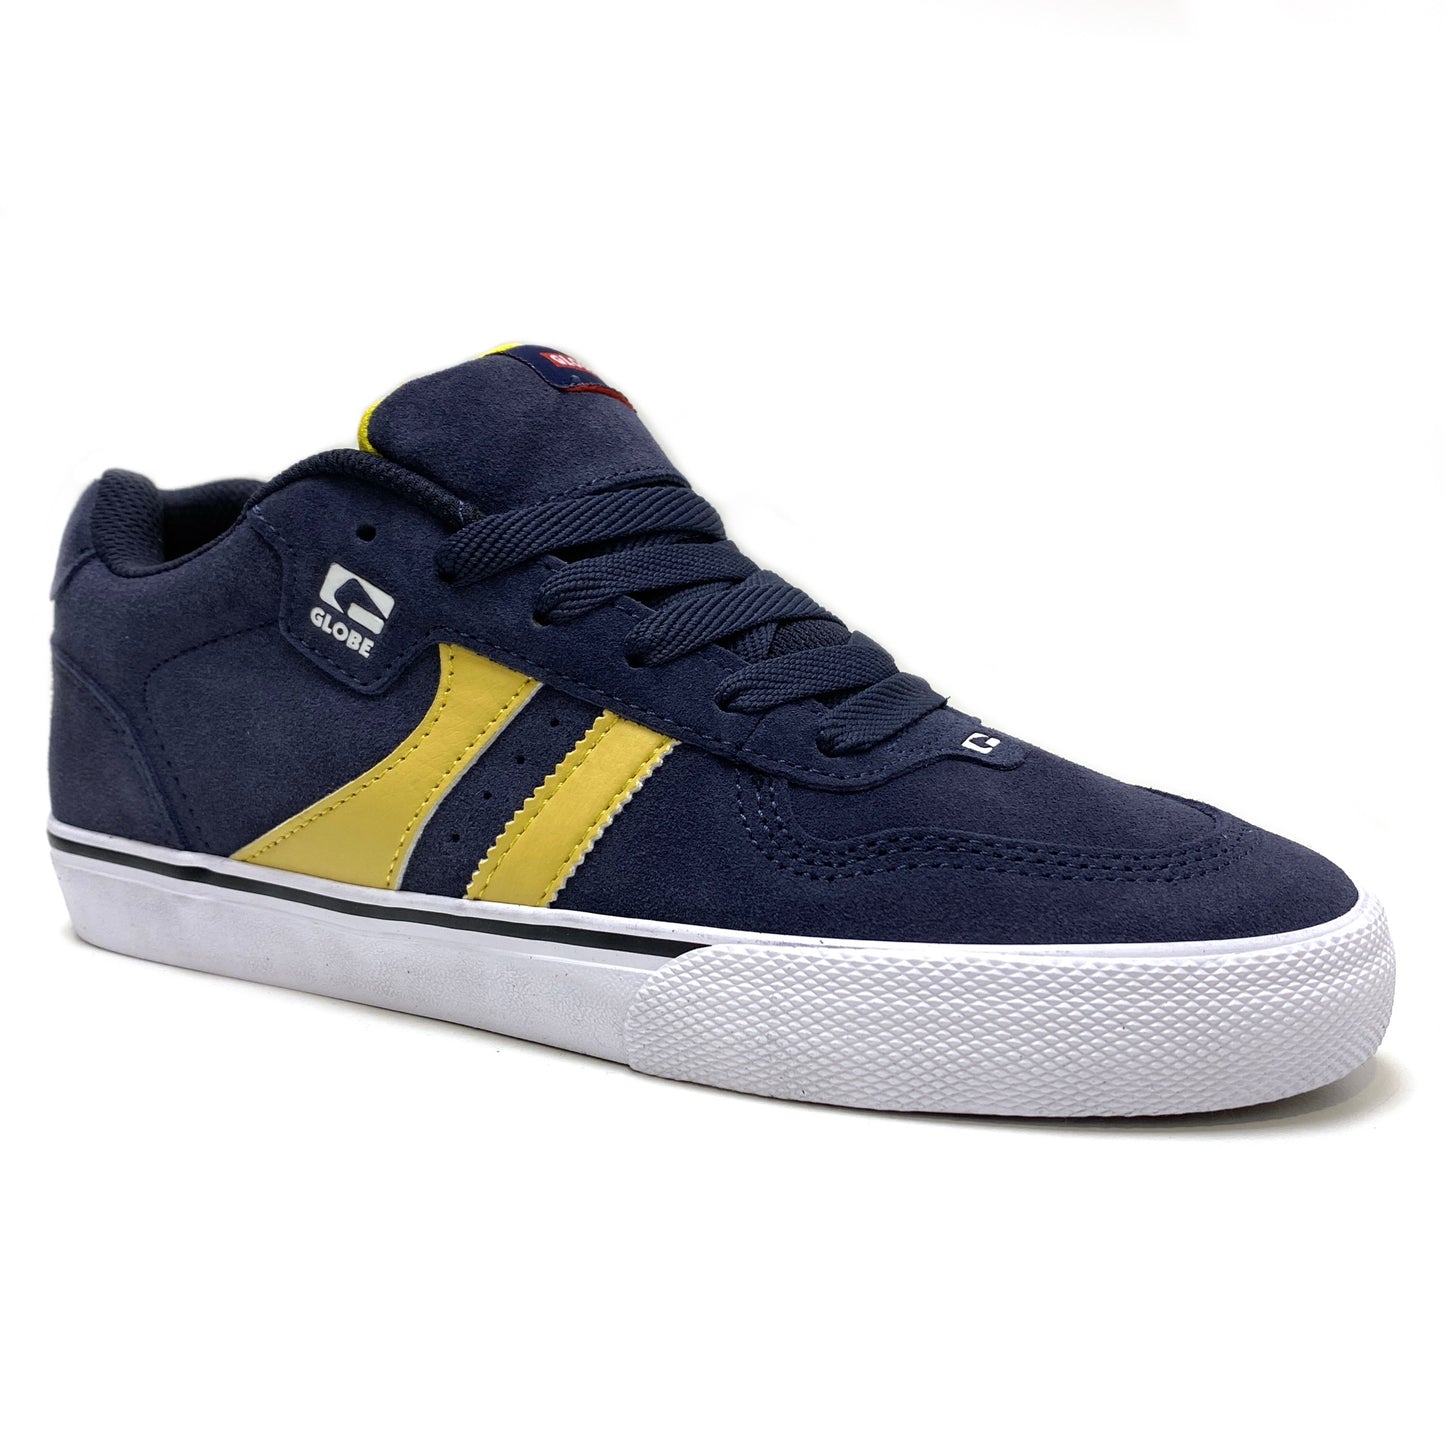 GLOBE ENCORE 2 NAVY PALE YELLOW TRAINERS